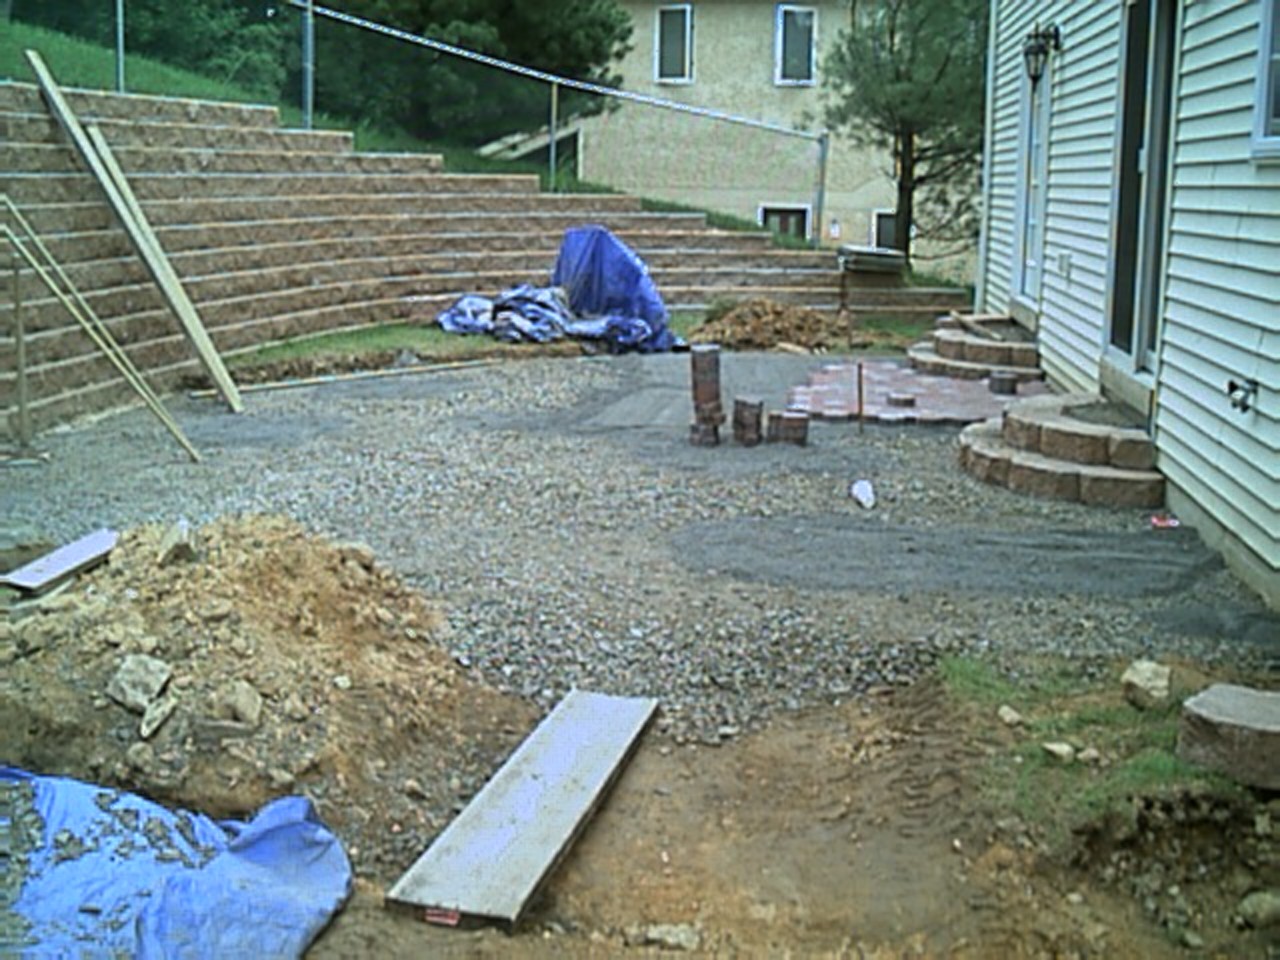 After evenly spreading stone fill, leveling it off, and making the rounded steps we started the pavers.